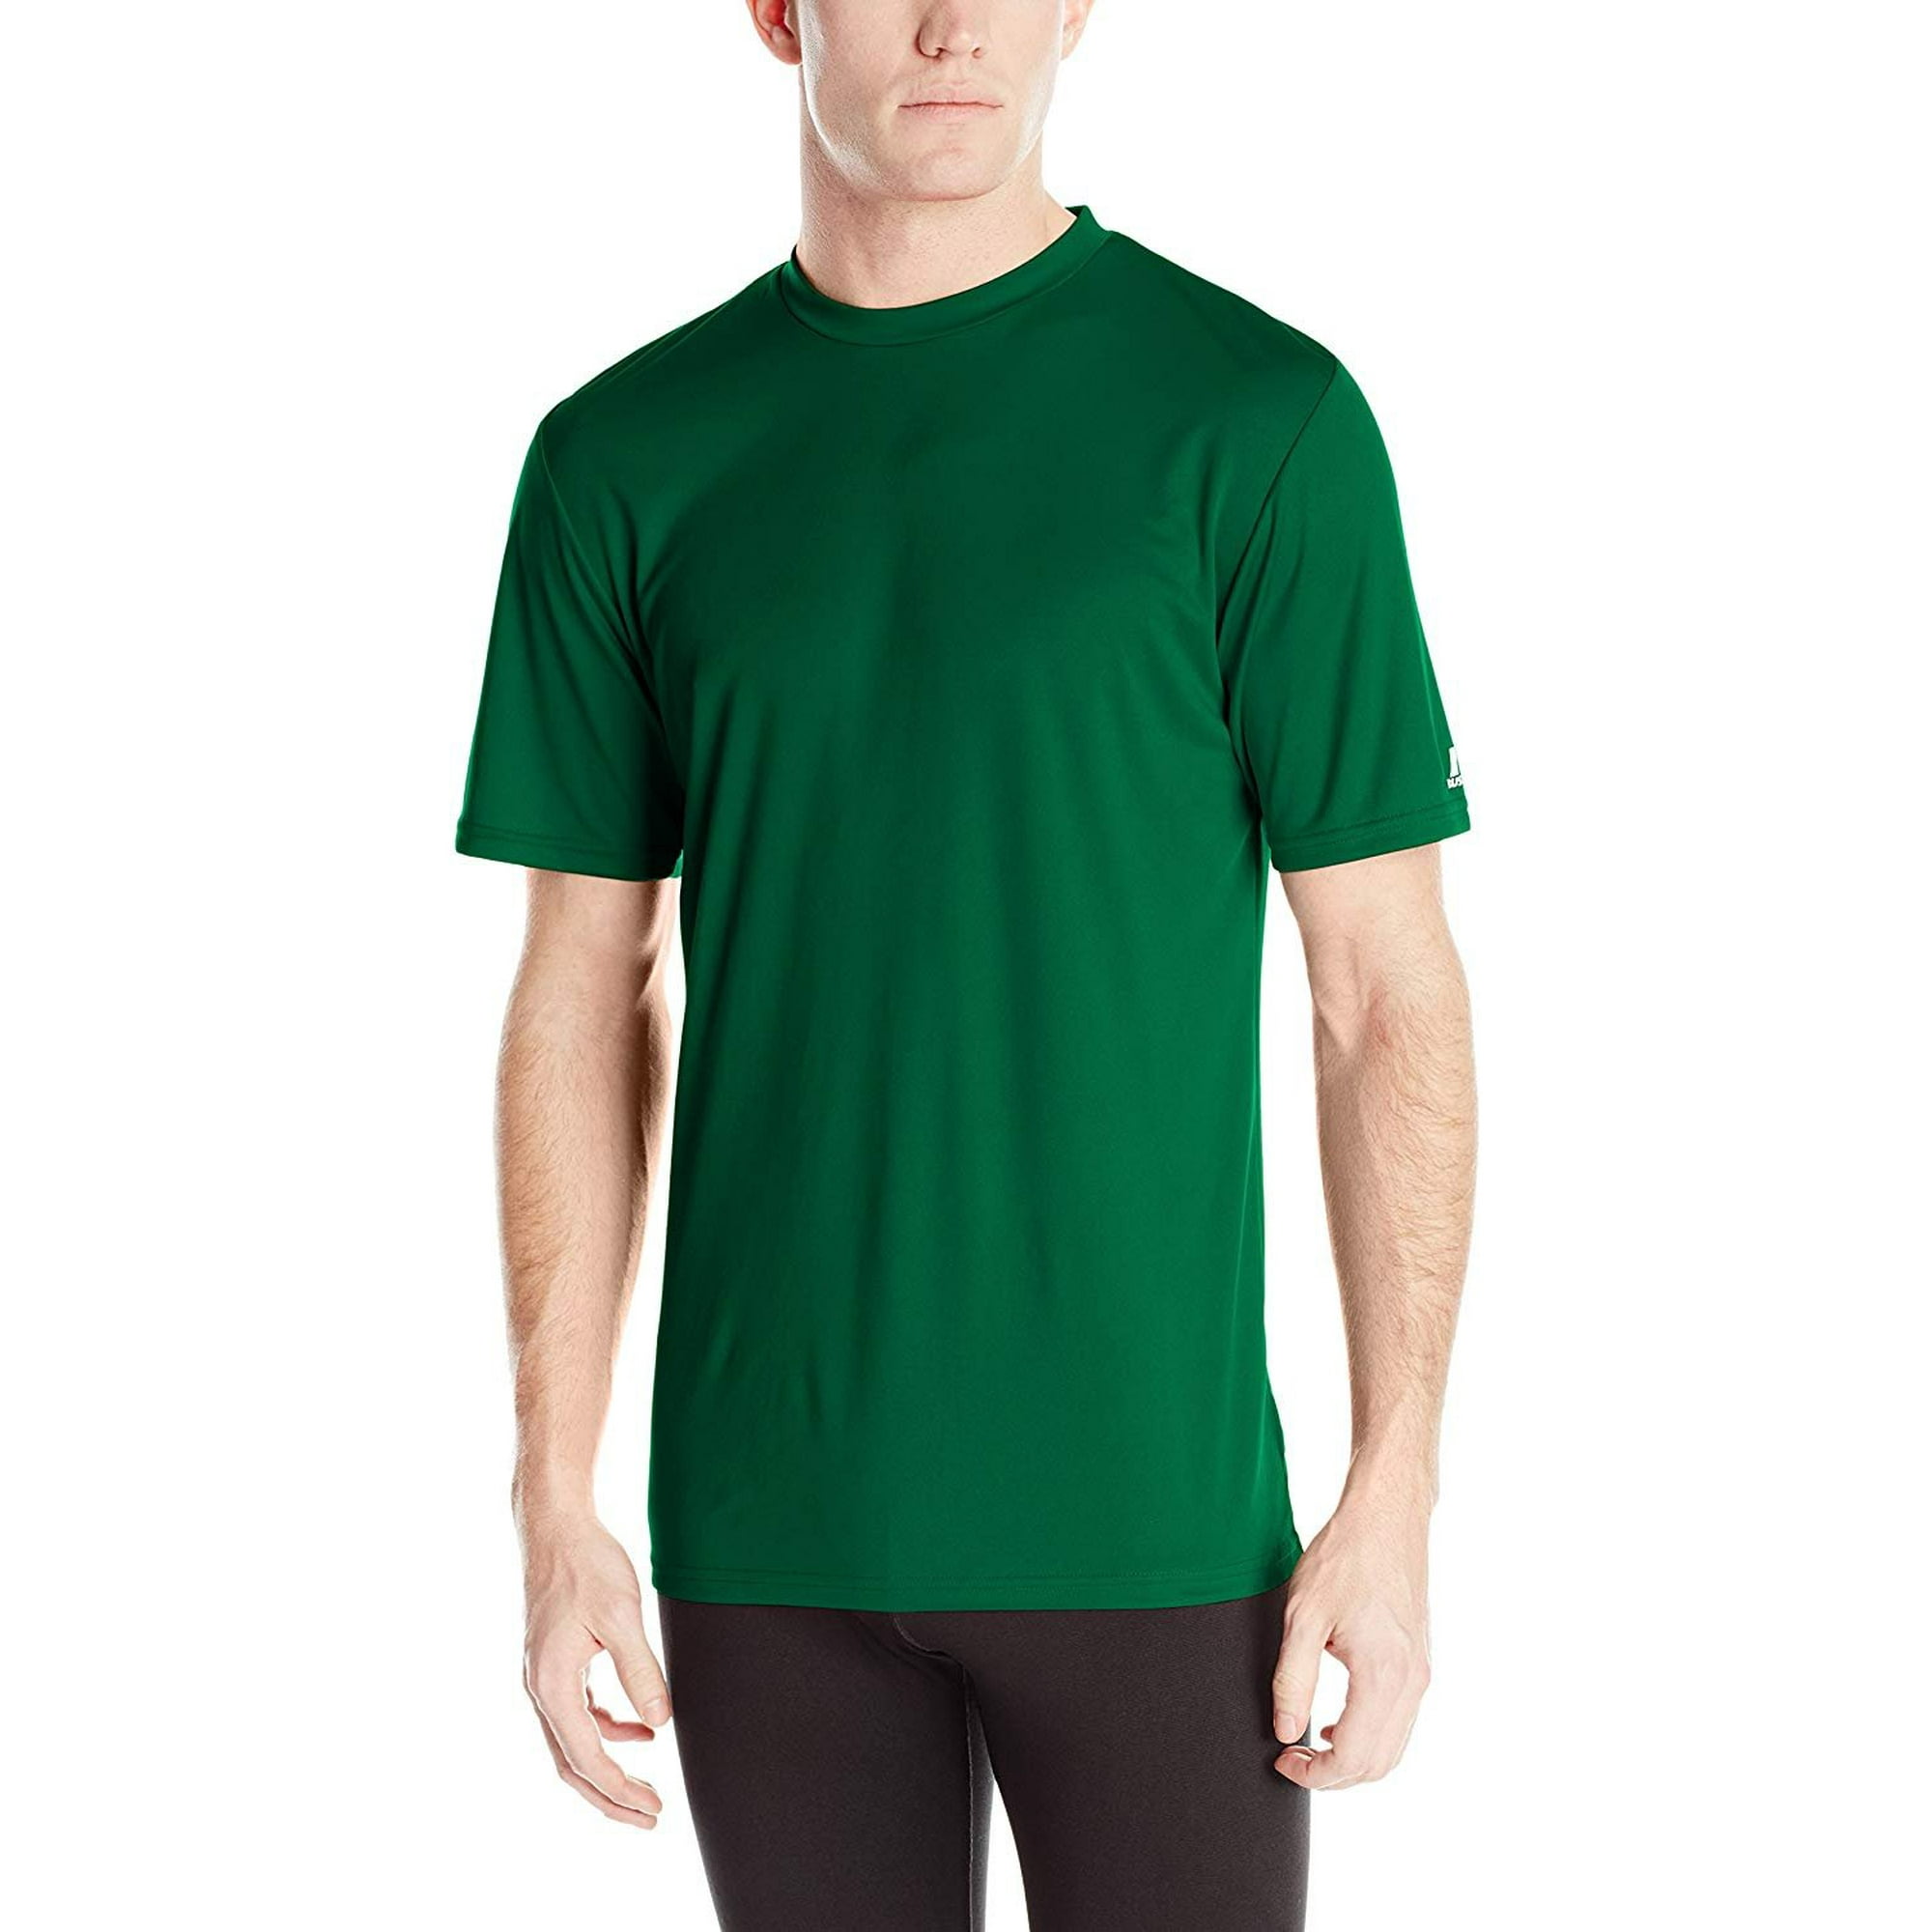 Russell Athletic Men's Top - Green - M